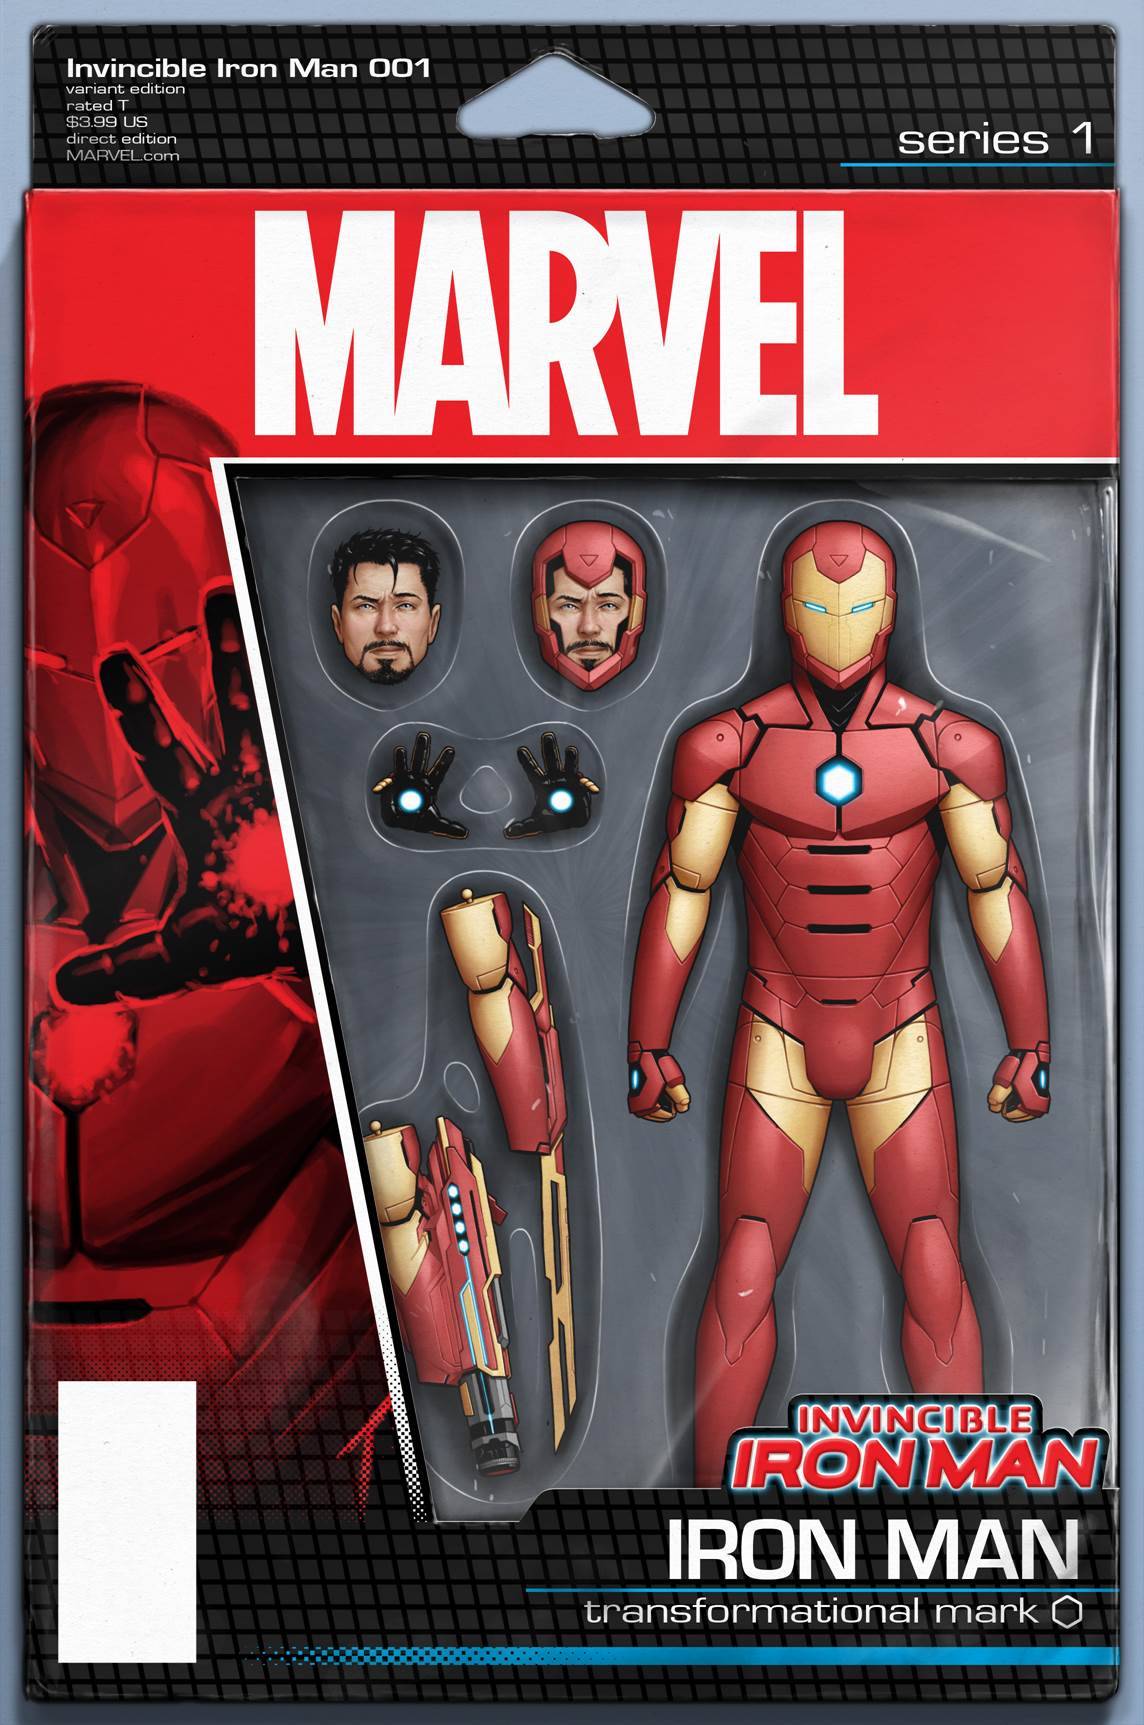 Invincible Iron Man #1 Action Figure variant cover by John Tyler Christopher